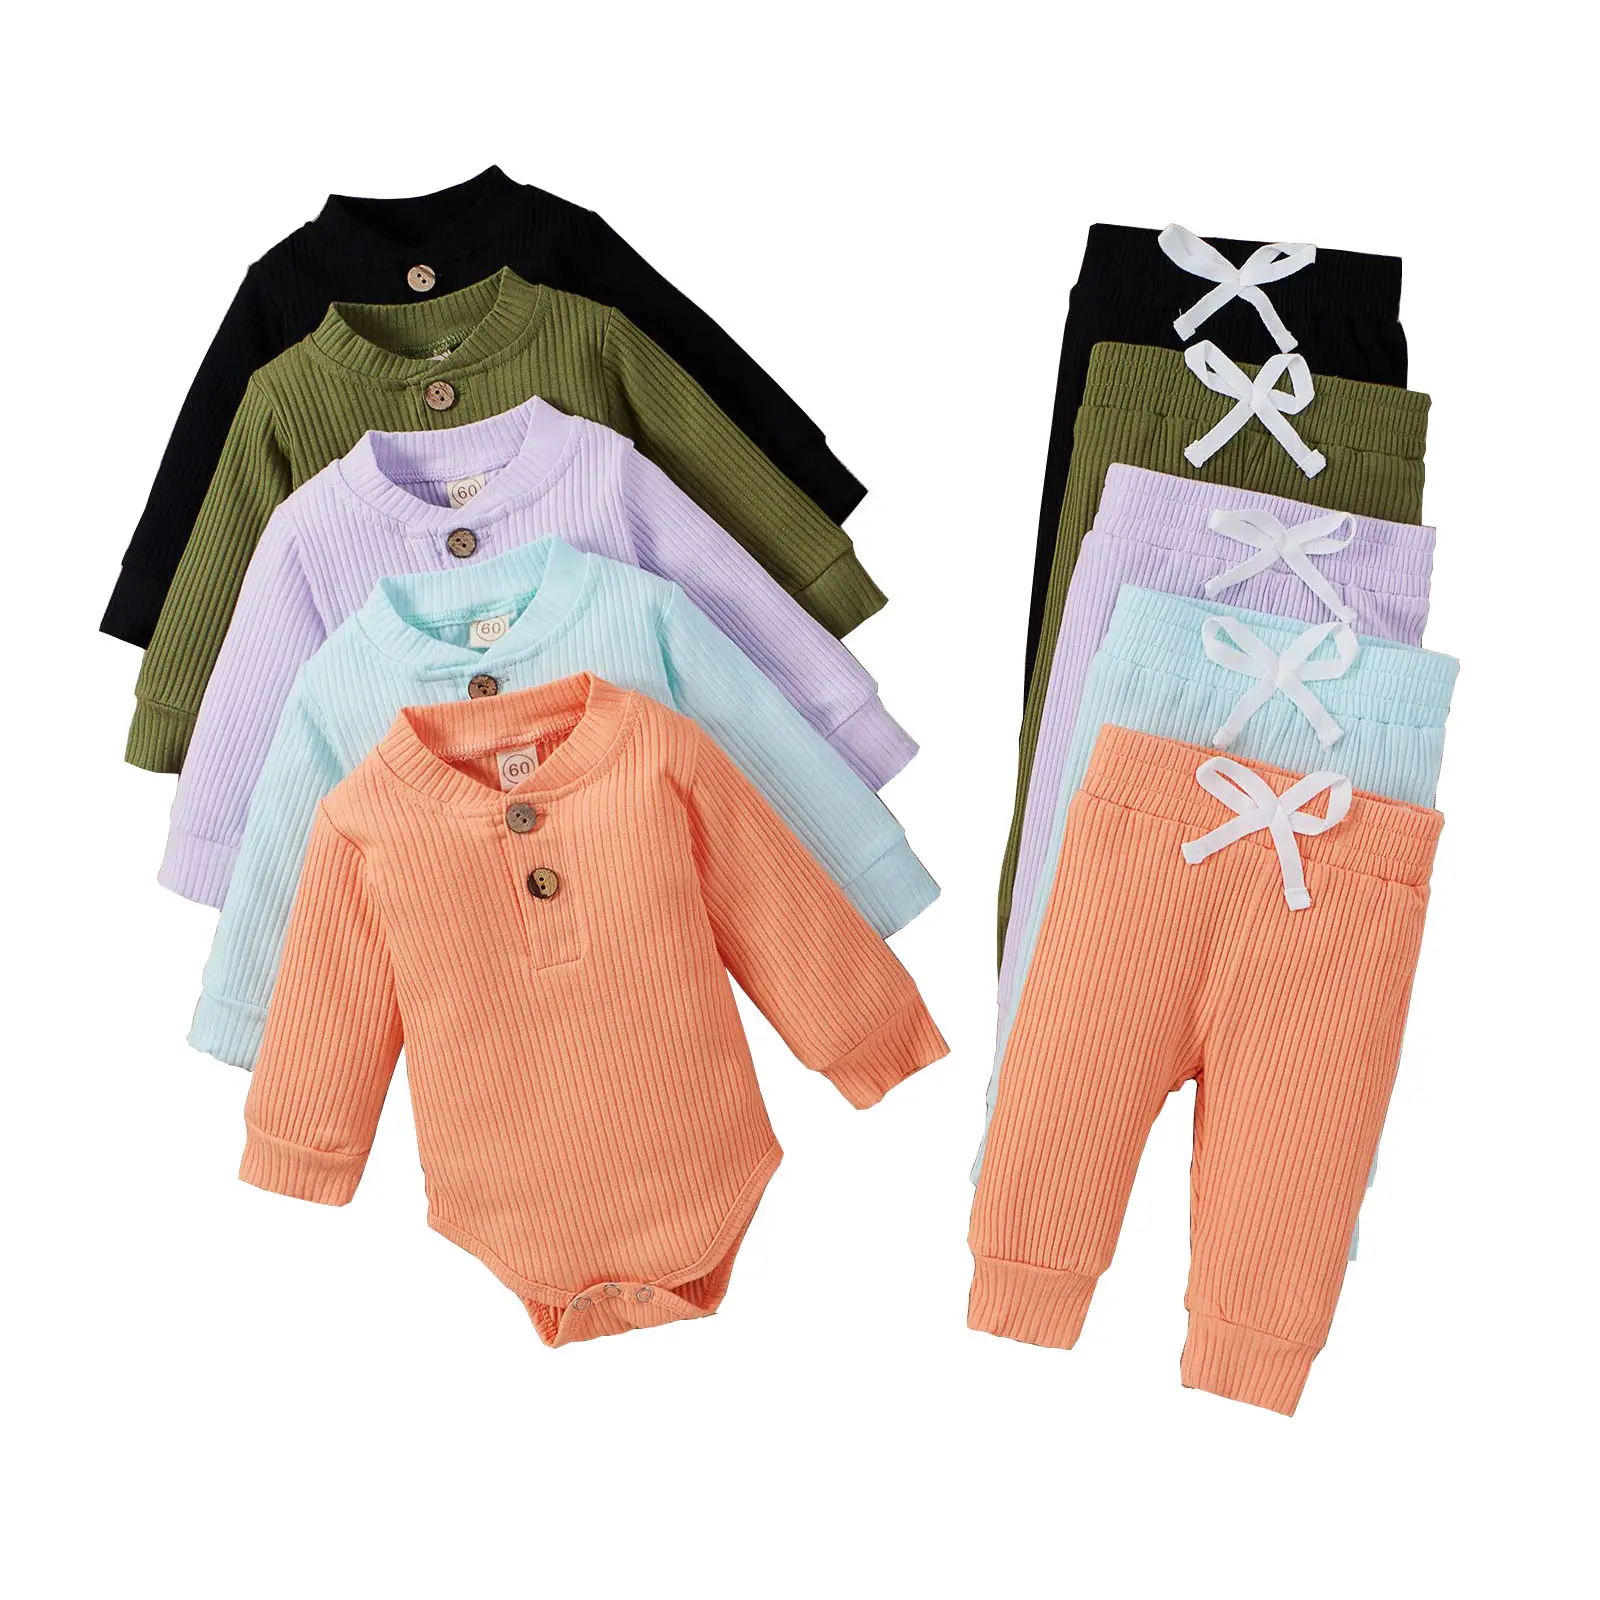 2022 cotton kids boy girls' romper pant clothes newborn baby clothing sets for 1year baby girl